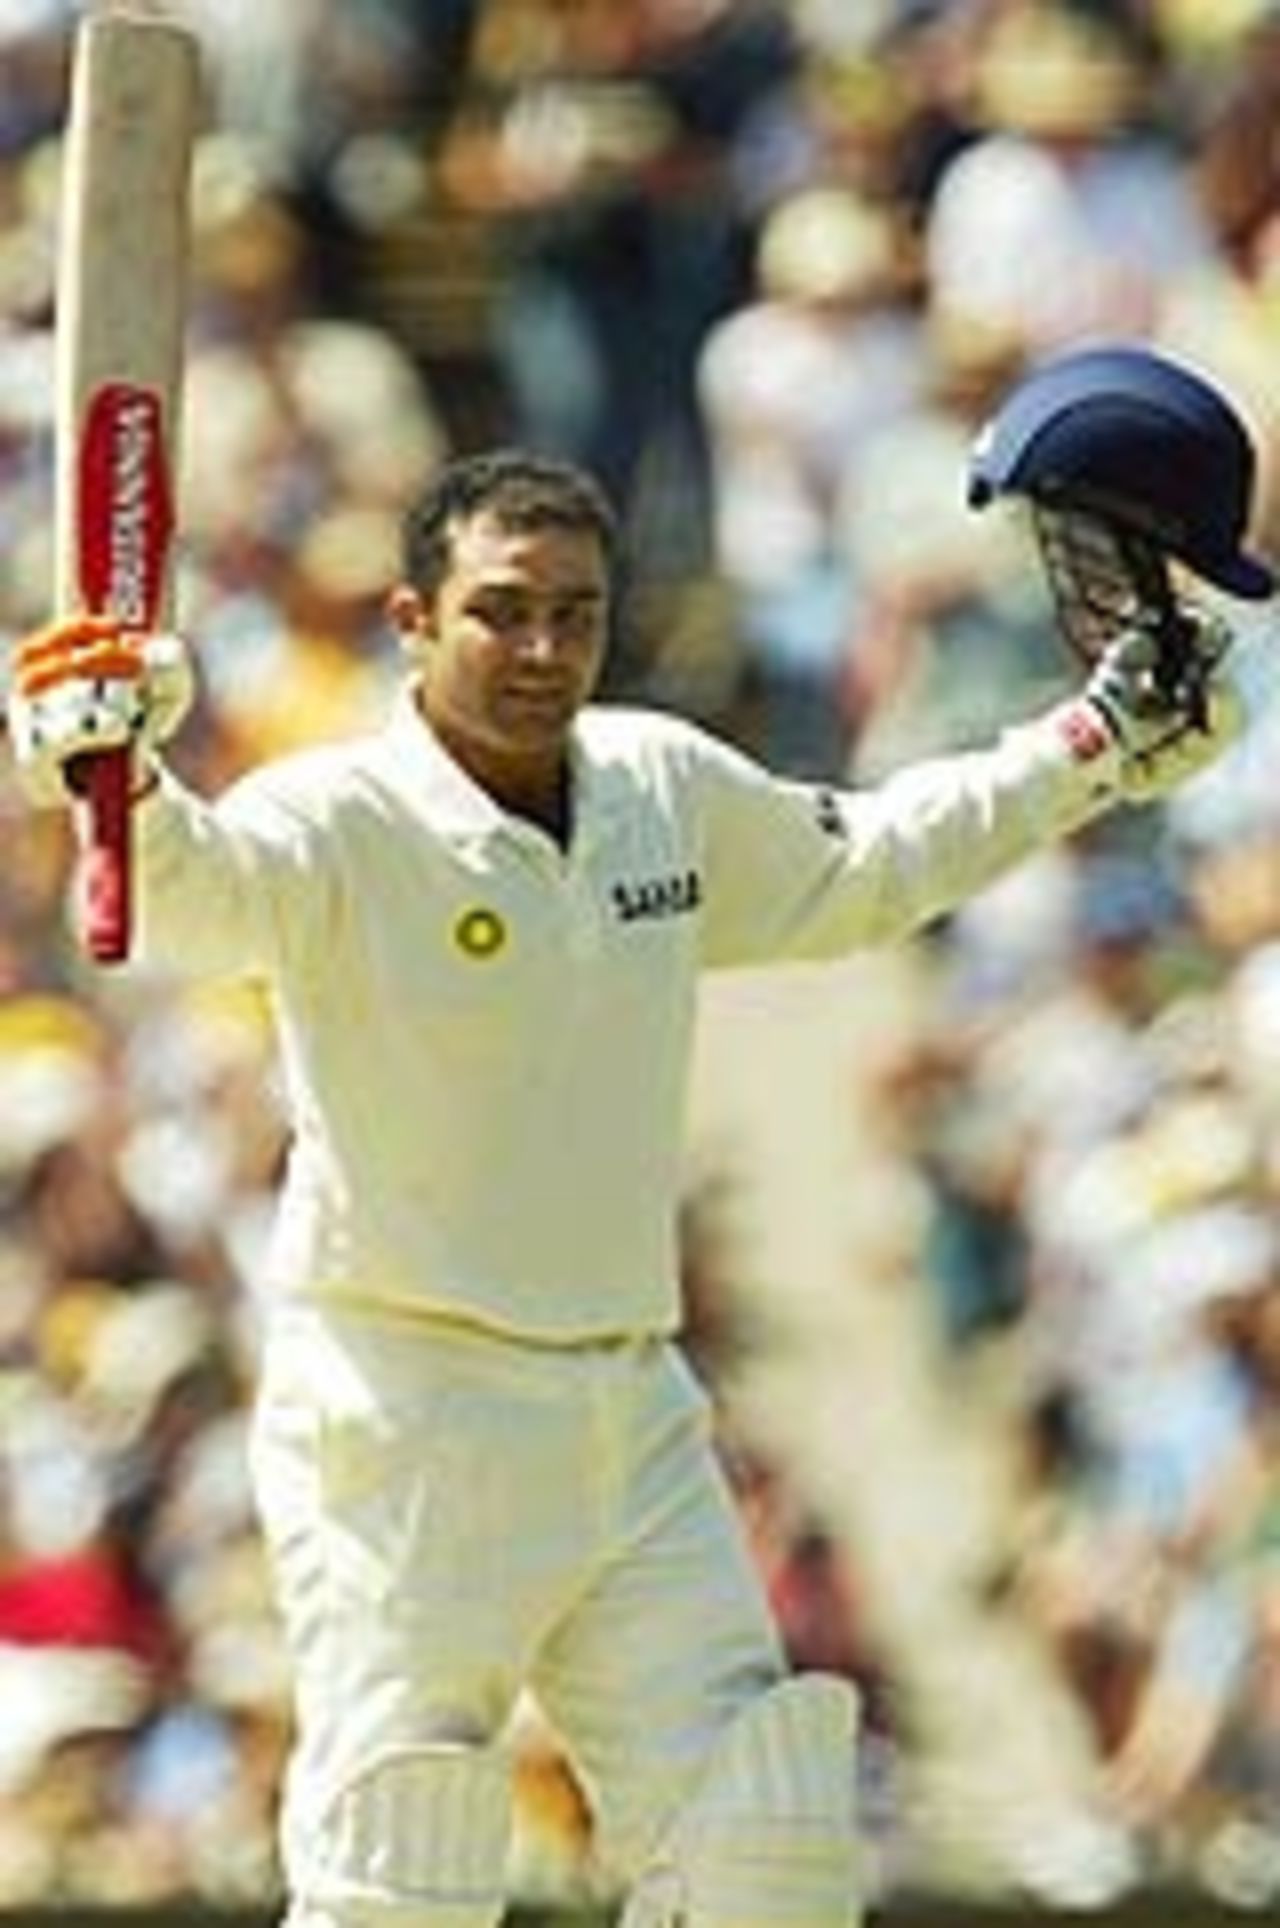 Virender Sehwag acknowledges the applause for his century, Australia v India, 3rd Test, Melbourne, 1st day, December 26, 2003